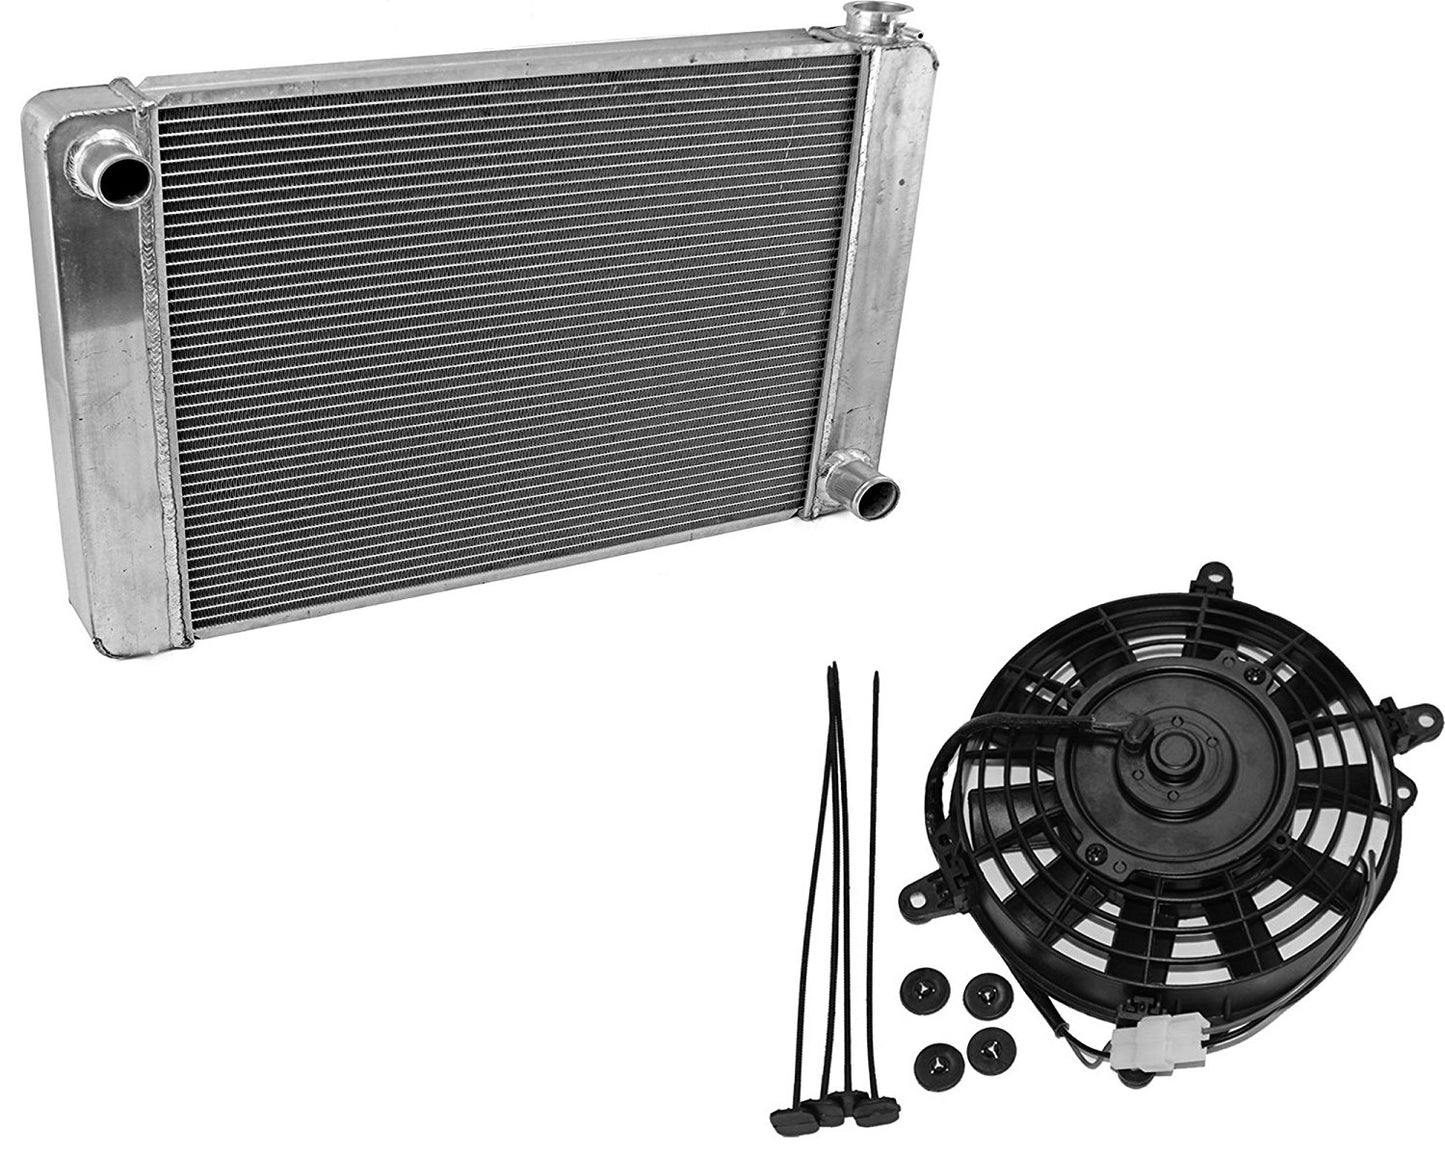 Fabricated Aluminum Radiator 31" x 19" x3" Overall For SBC BBC Chevy GM & 8" Staight Blade Electric Radator Cooling Fan